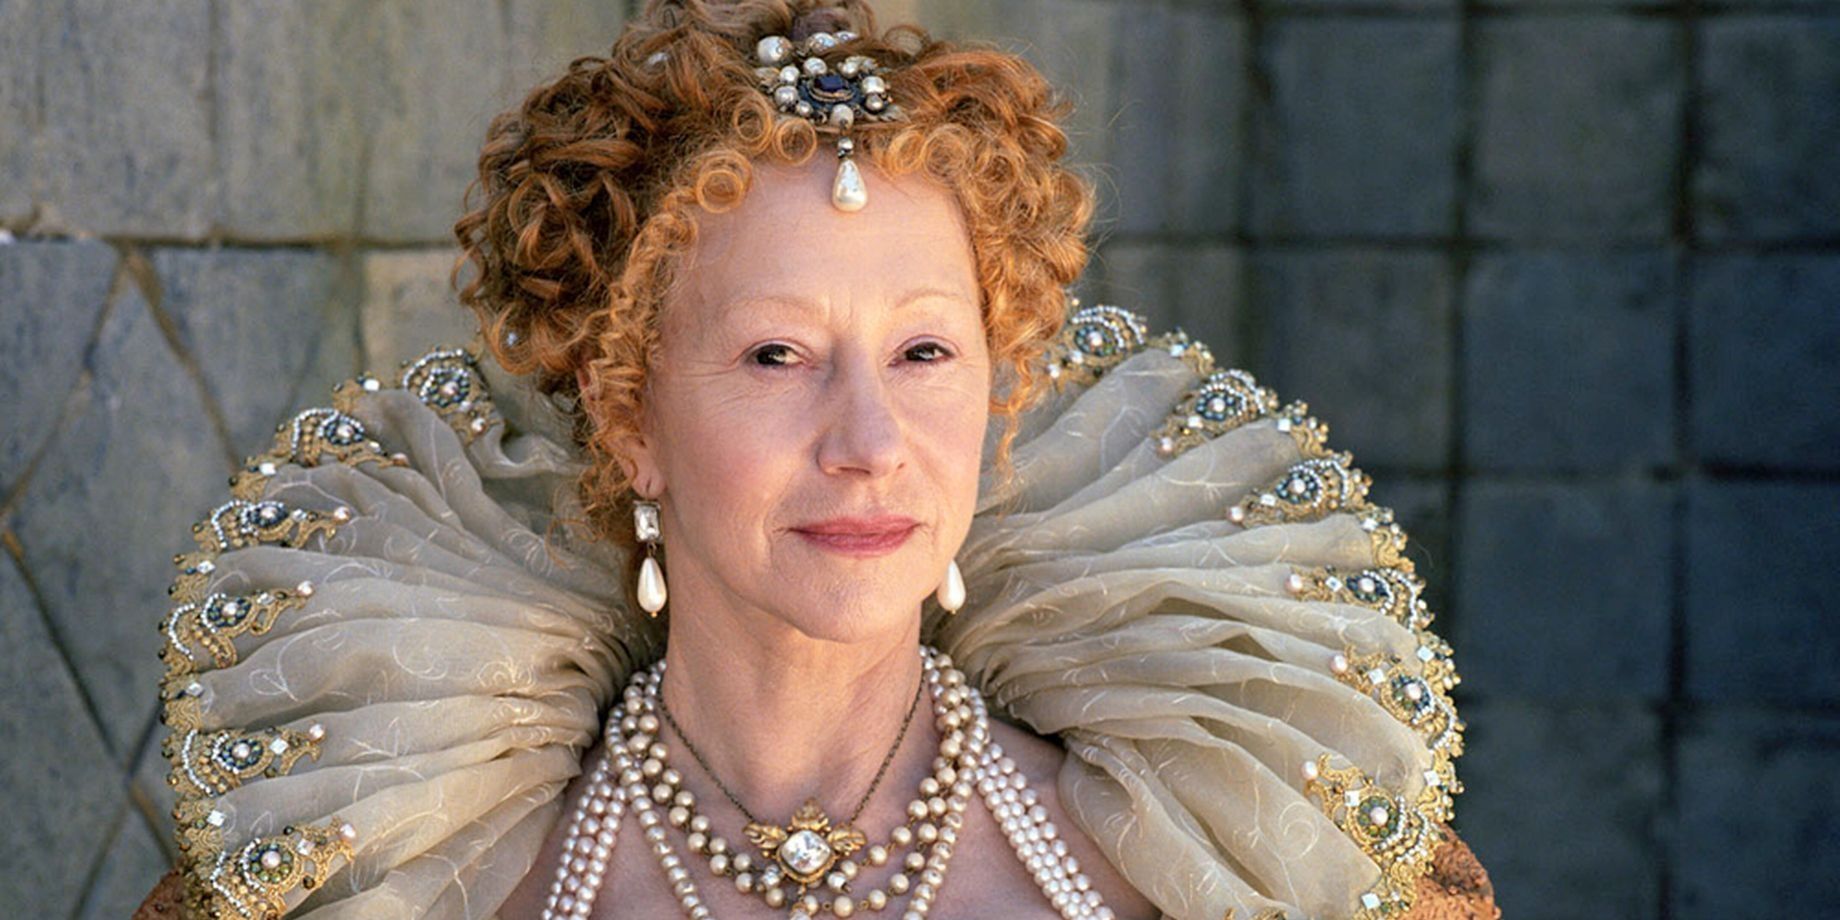 Queen Elizabeth smiling softly while looking intently I in Elizabeth I